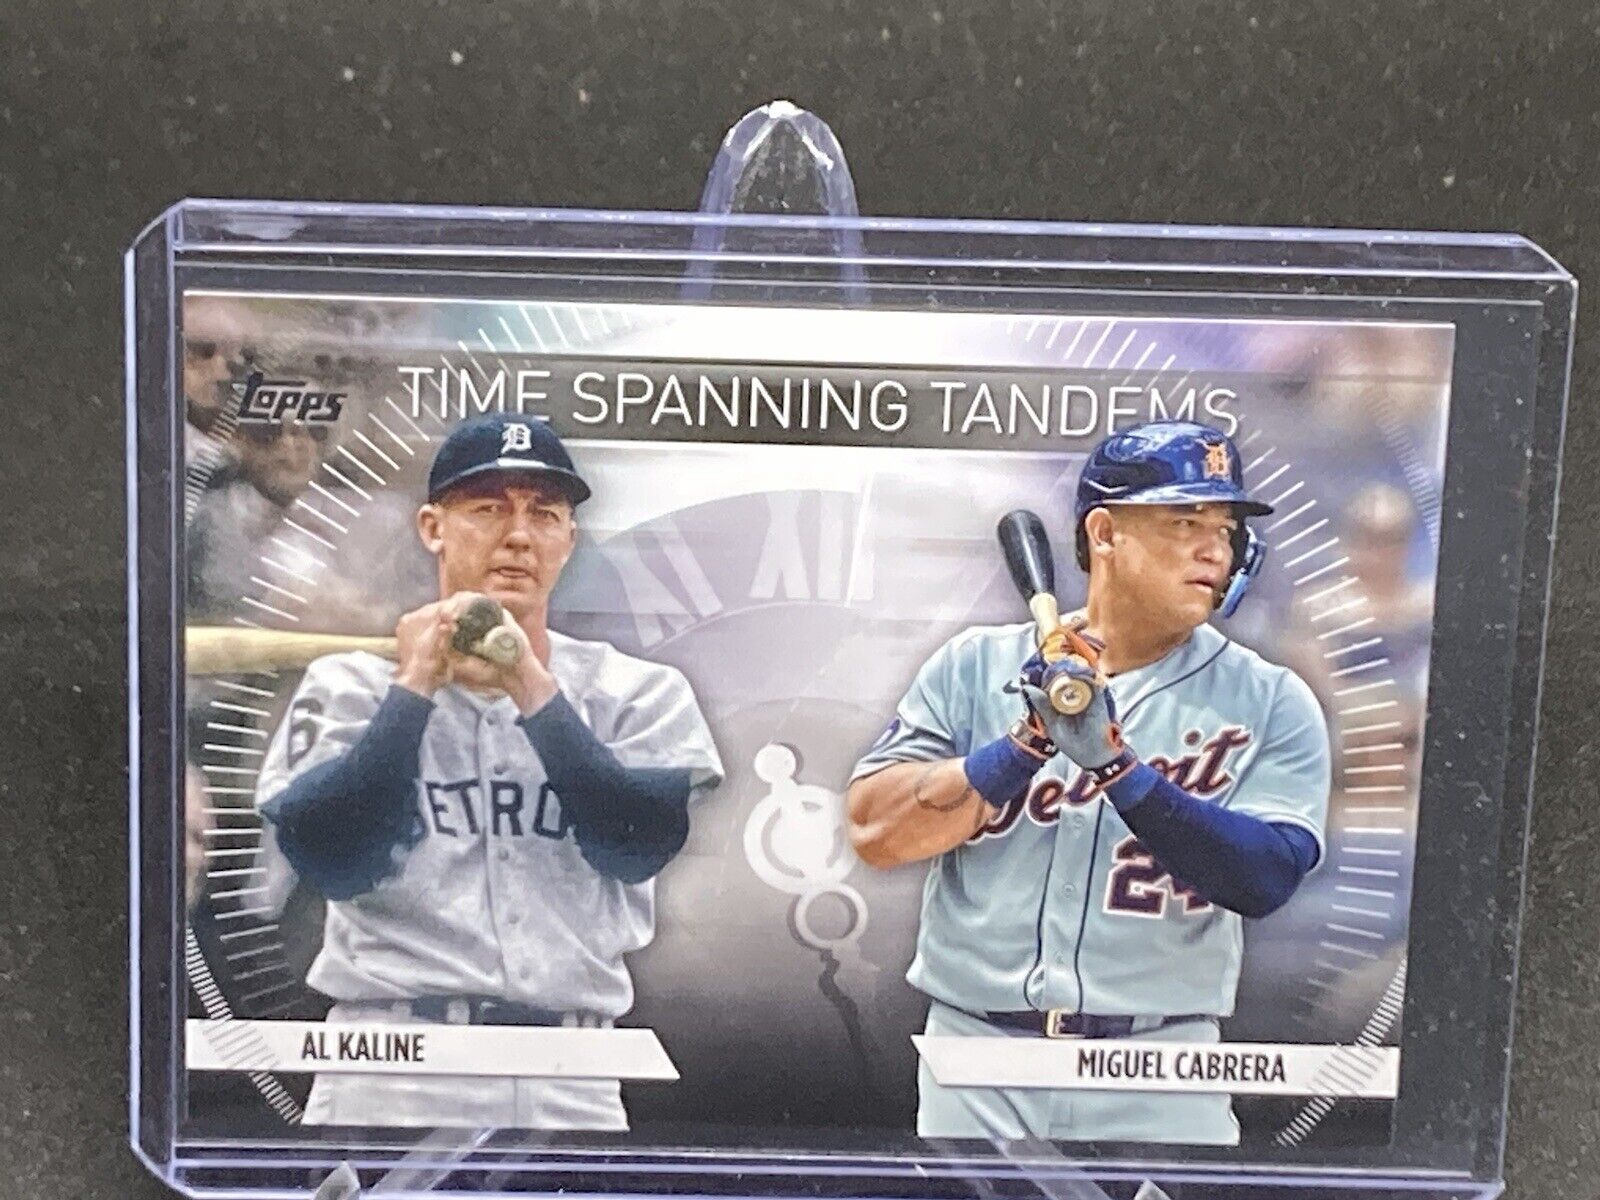 2023 Topps Update Time Spanning Tandems #TS-25 Miguel Cabrera, Al Kaline Tigers